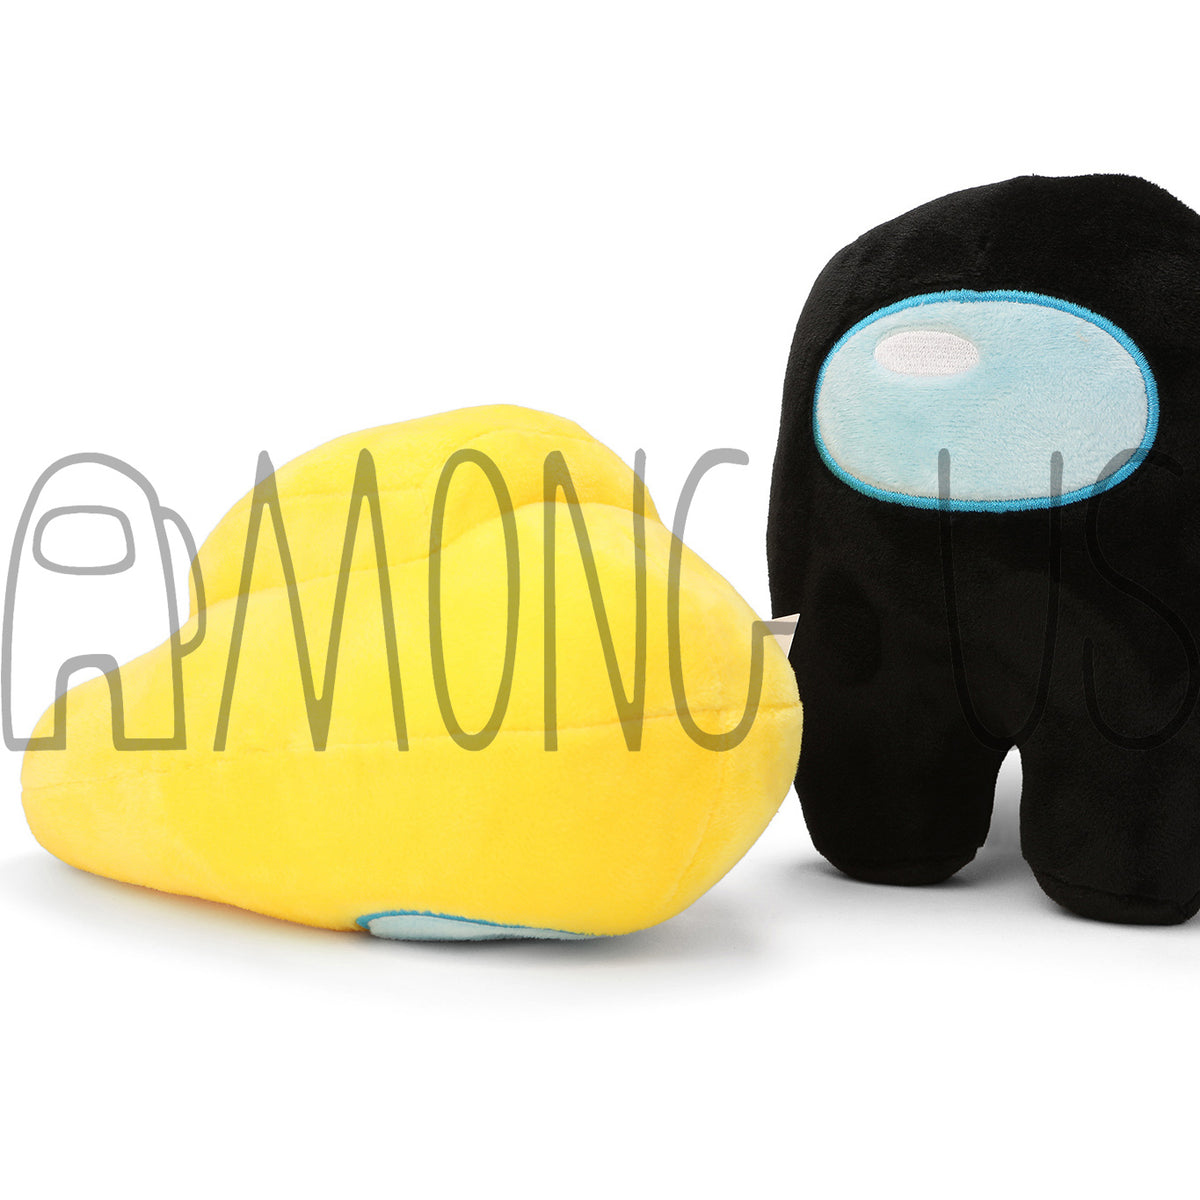 Among Us: Crewmate Plush by Frisk Wolfie